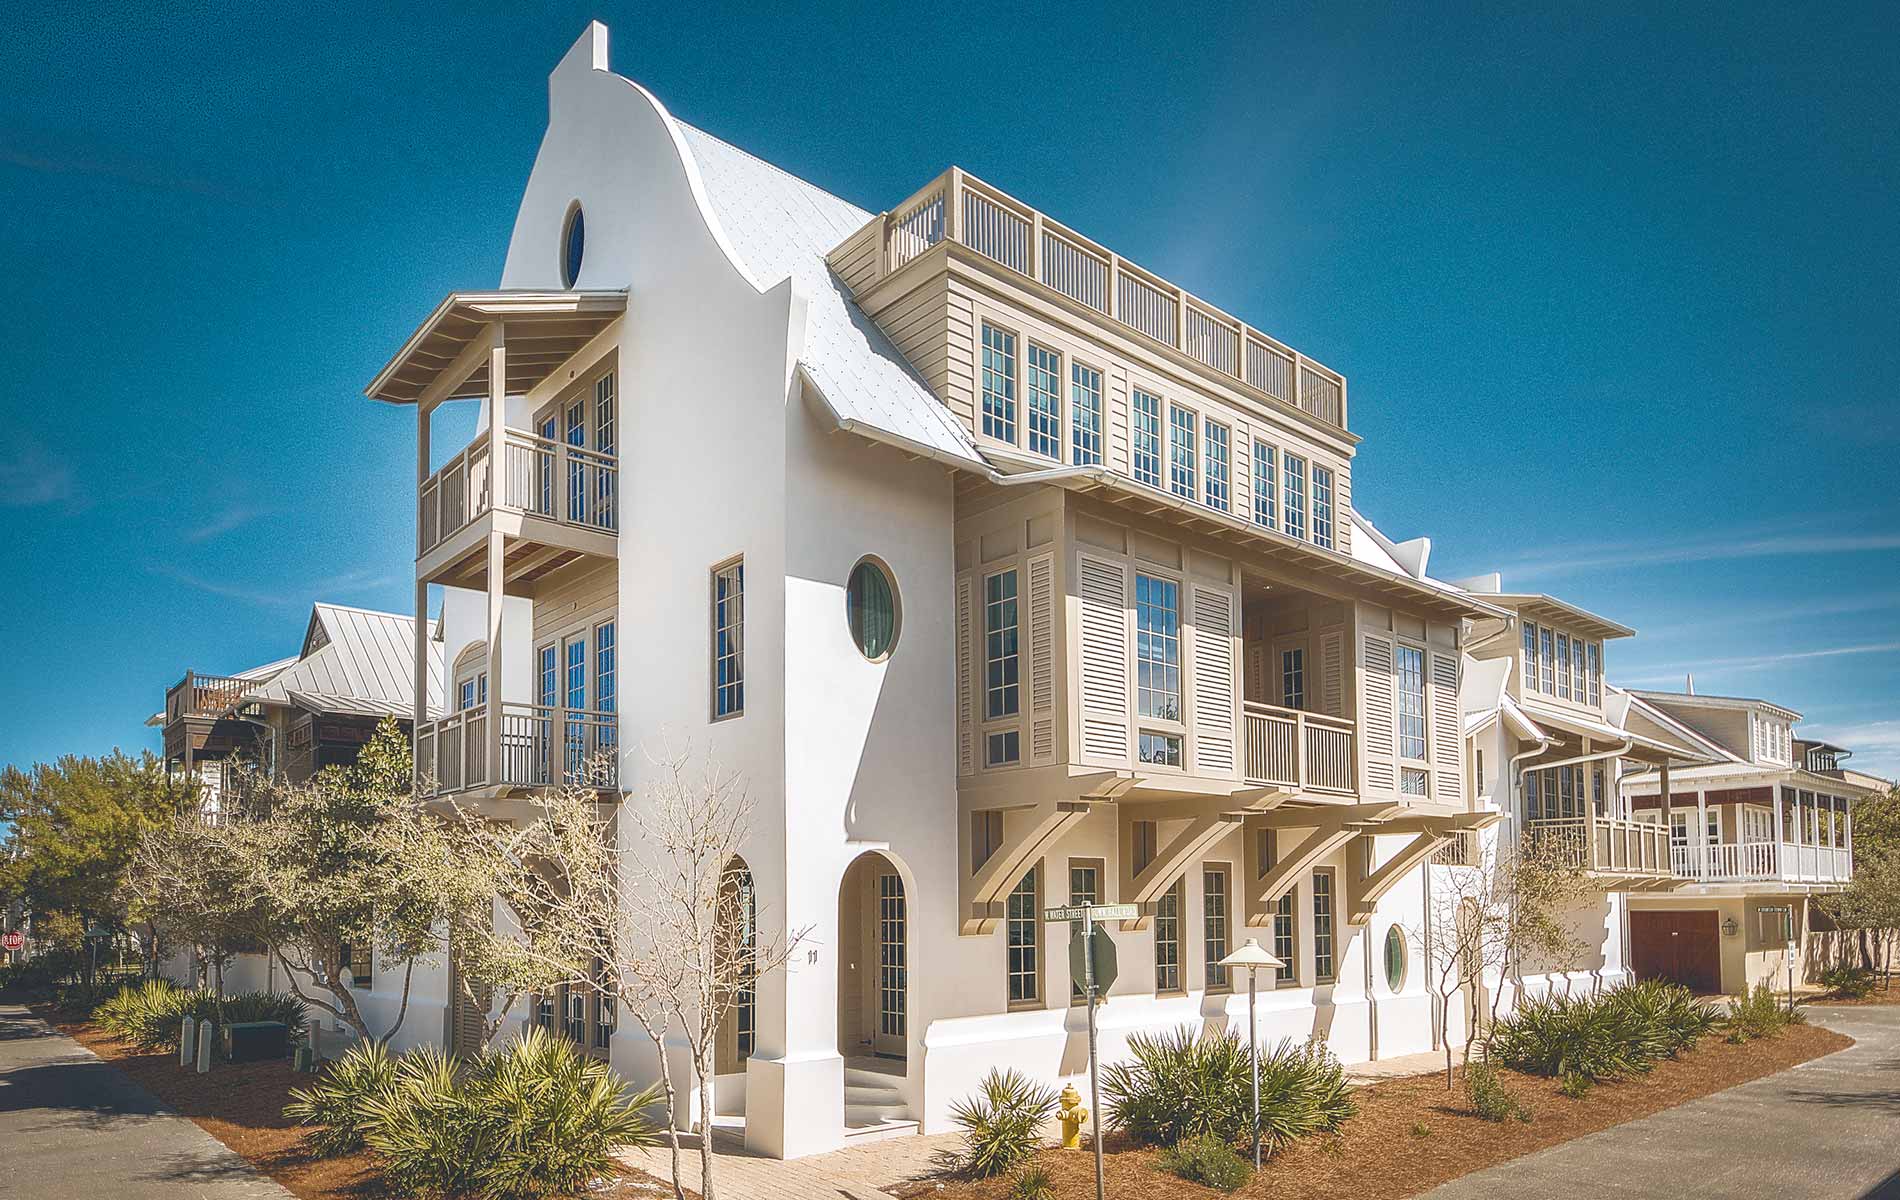 11 Town Hall Road in 30-A’s Rosemary Beach, Erin Oden Coastal Luxury